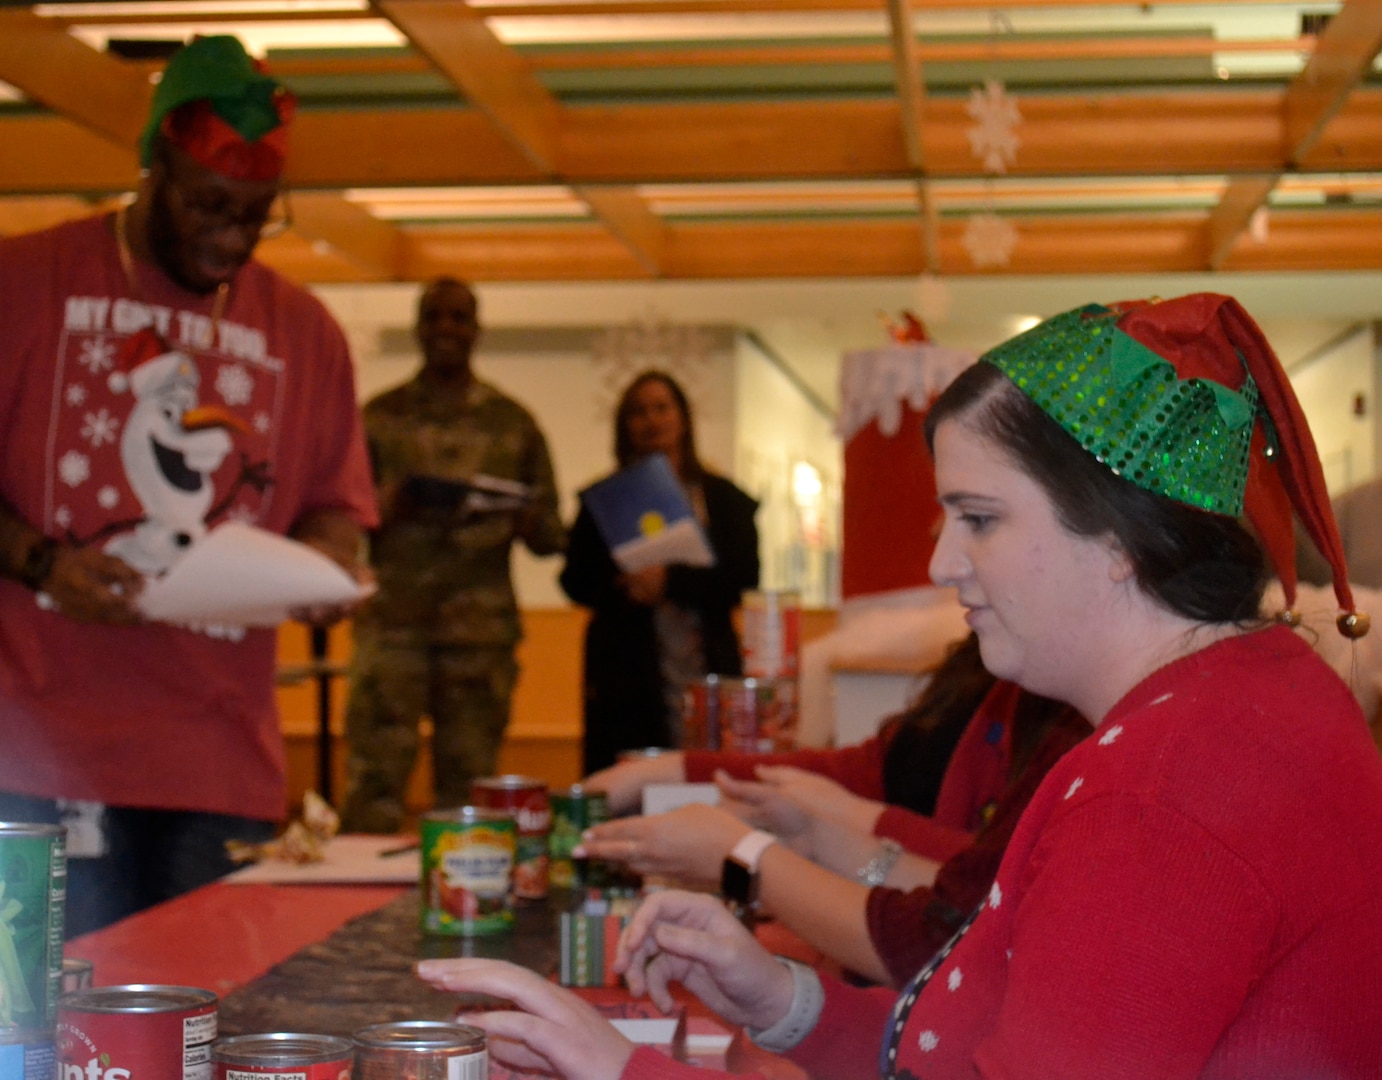 DLA Troop Support employees from the Clothing and Textiles supply chain perform a skit preparing items for Santa Claus to deliver to those in need during the annual Troop Support holiday decorating contest Dec. 20, 2019, in Philadelphia.